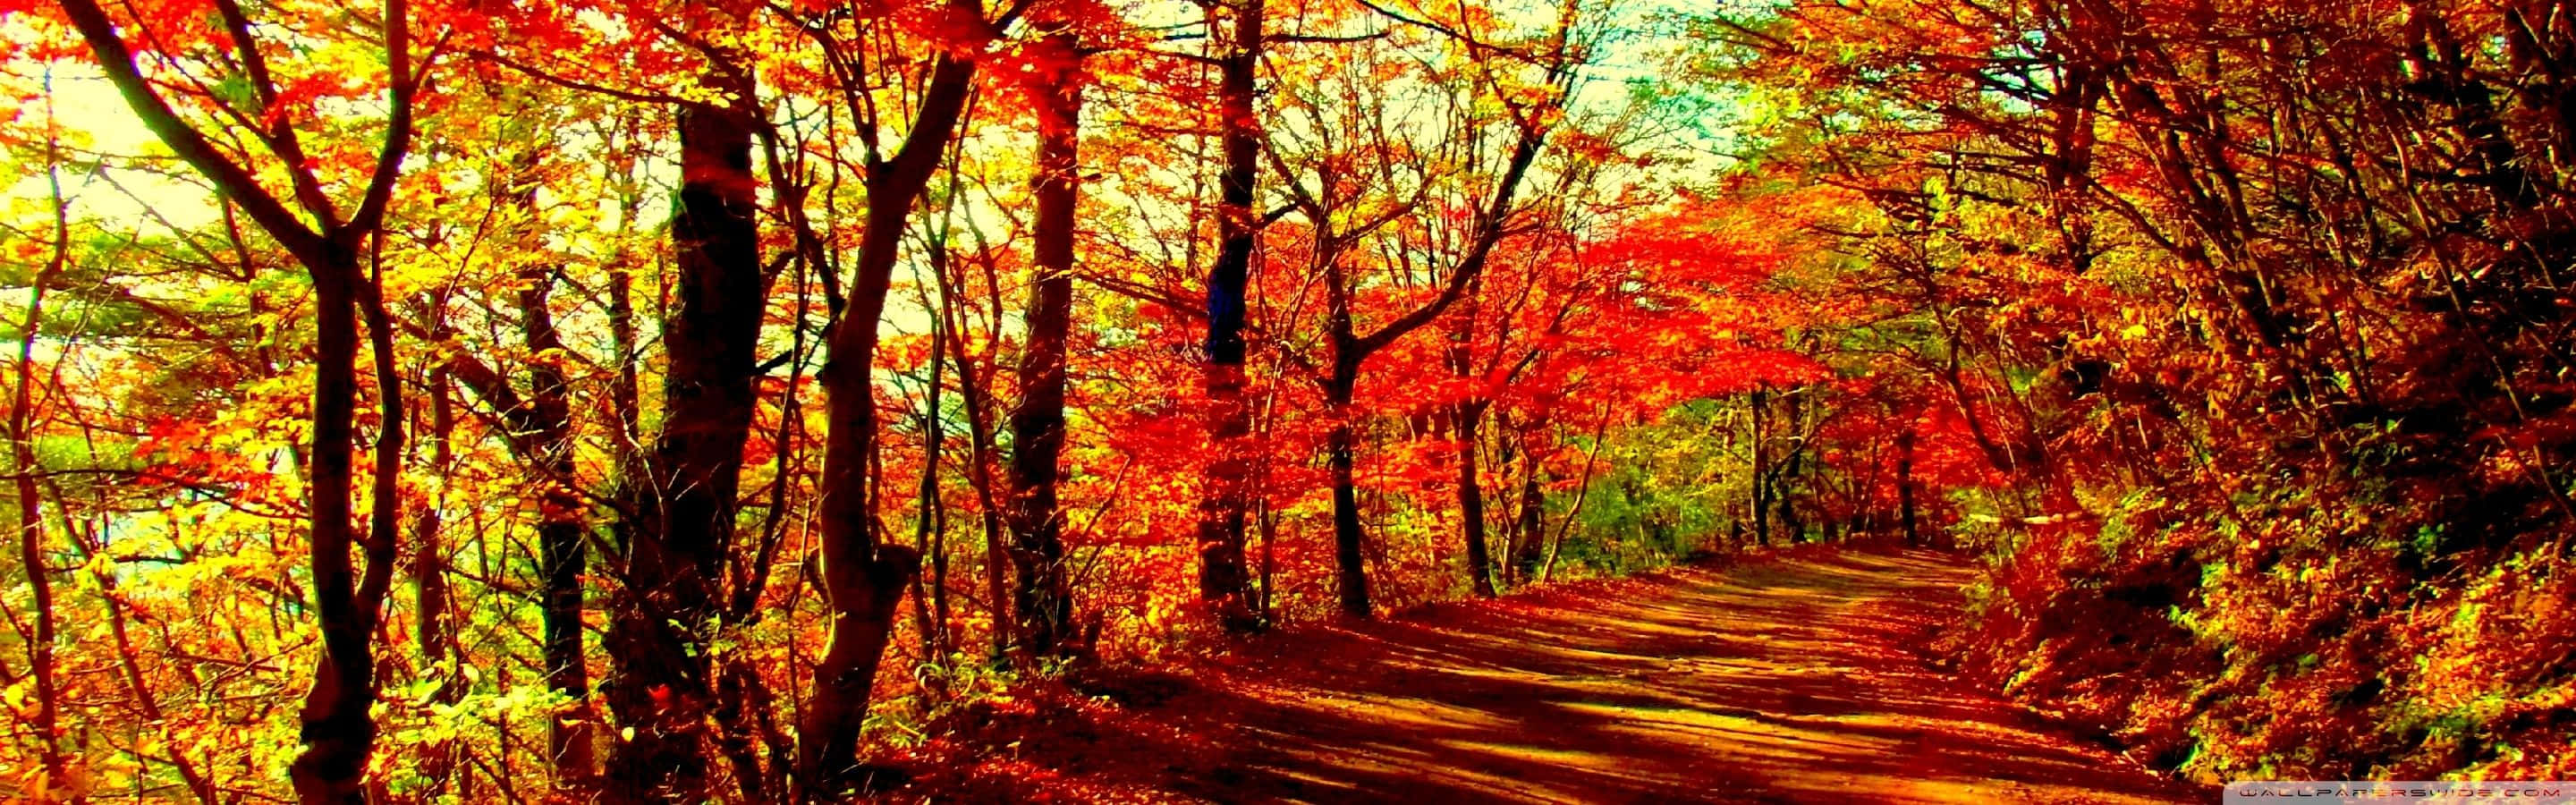 A Road In The Woods With Colorful Leaves Wallpaper